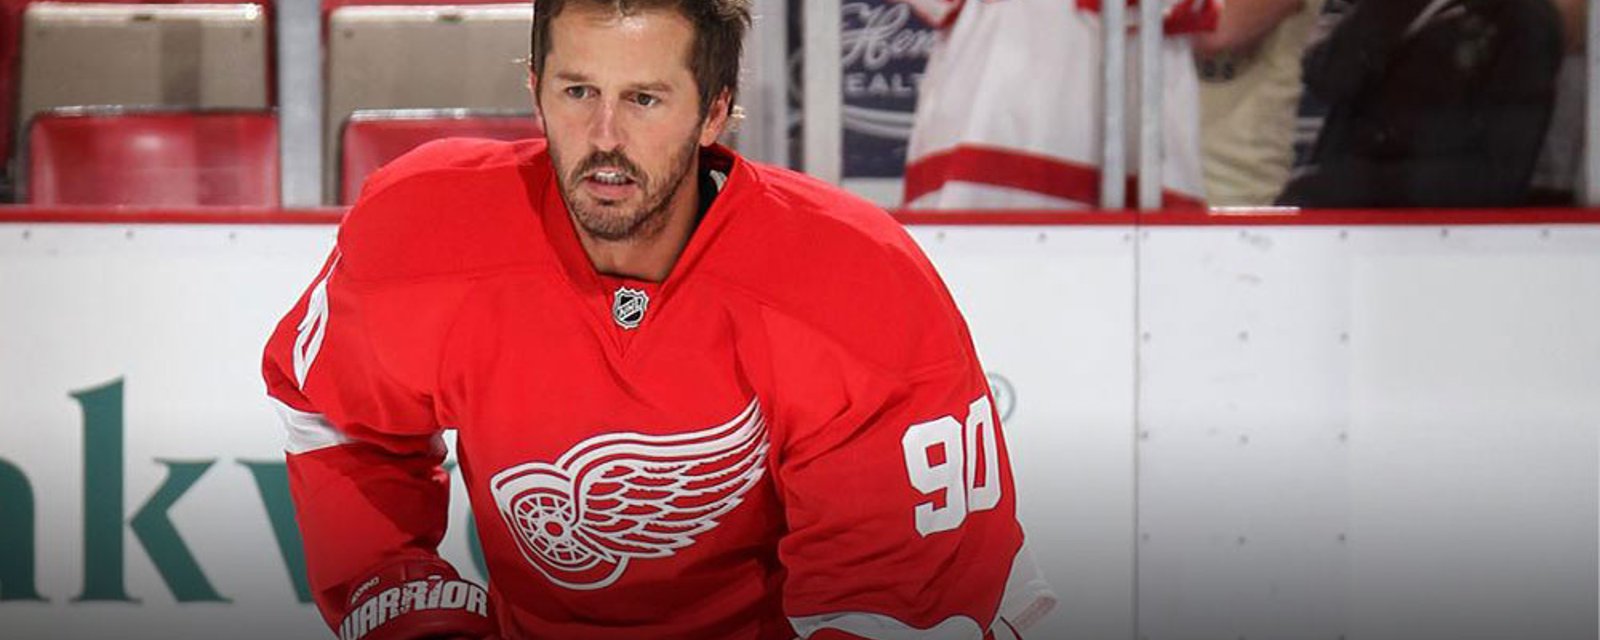 On this Day: Stars legend Modano joins Red Wings